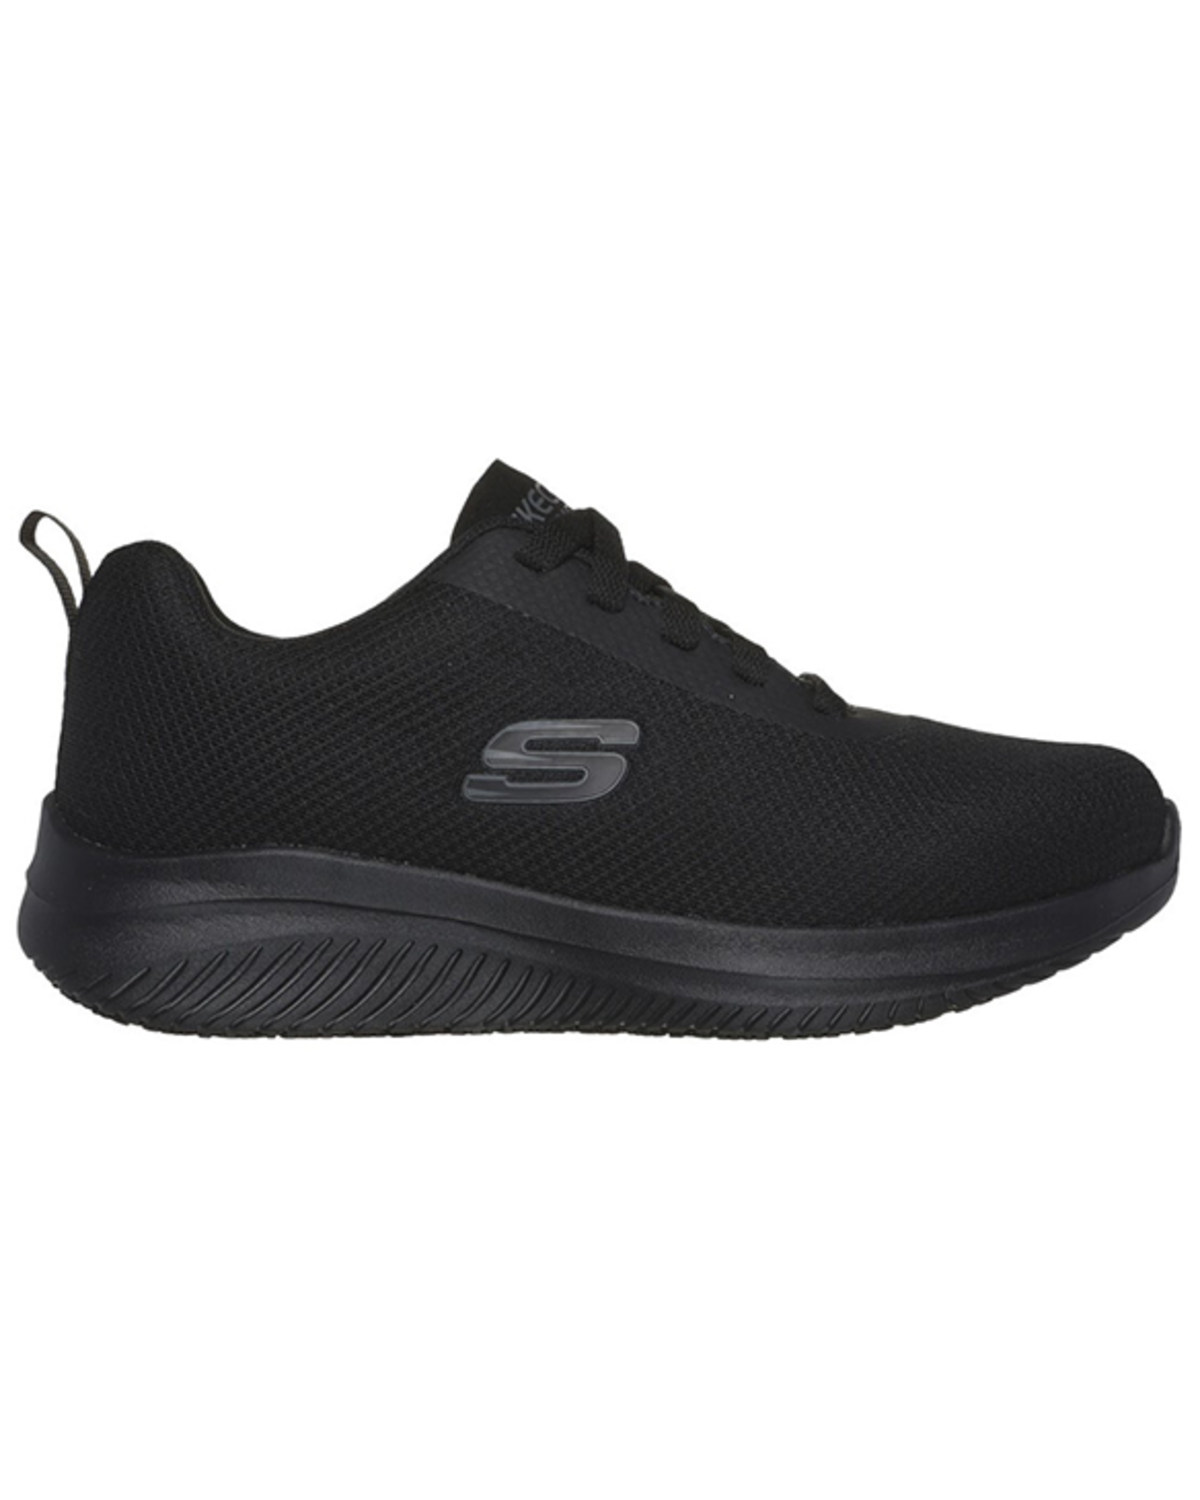 Skechers Women's Relaxed Fit Ultra Flex 3.0 Work Shoes - Round Toe